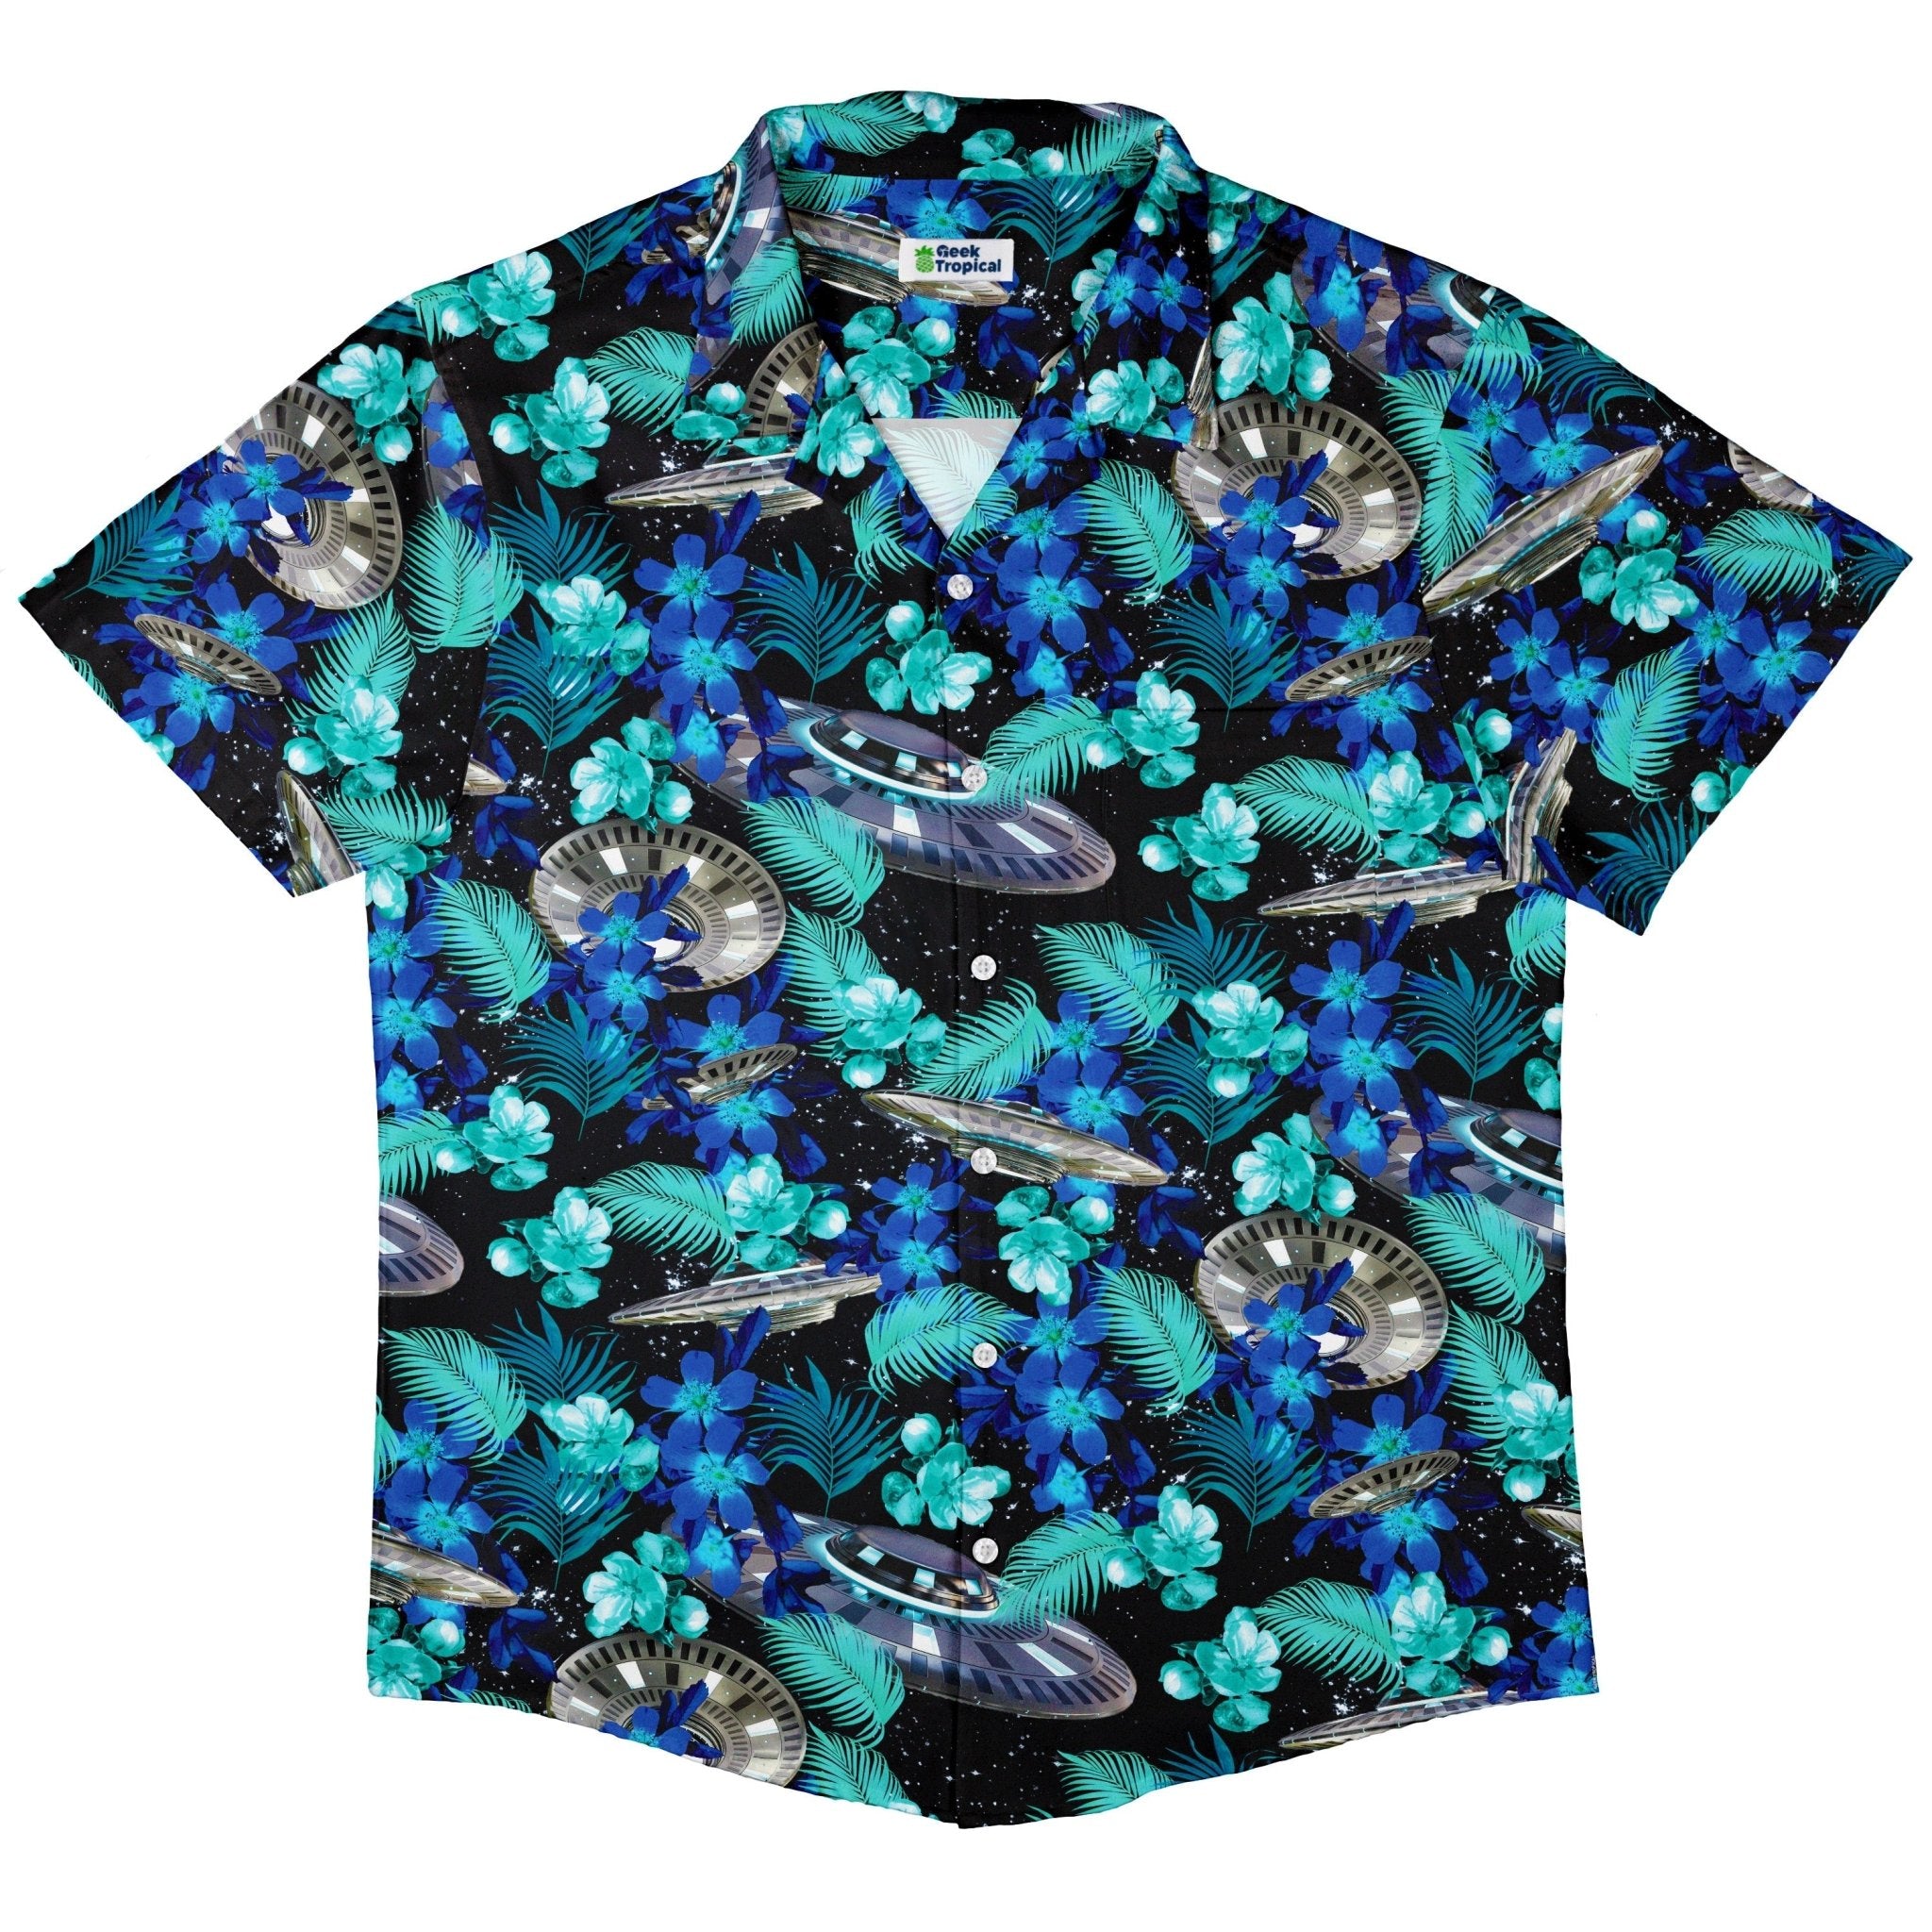 Tropical UFO Space Button Up Shirt - adult sizing - Design by Random Galaxy - Maximalist Patterns